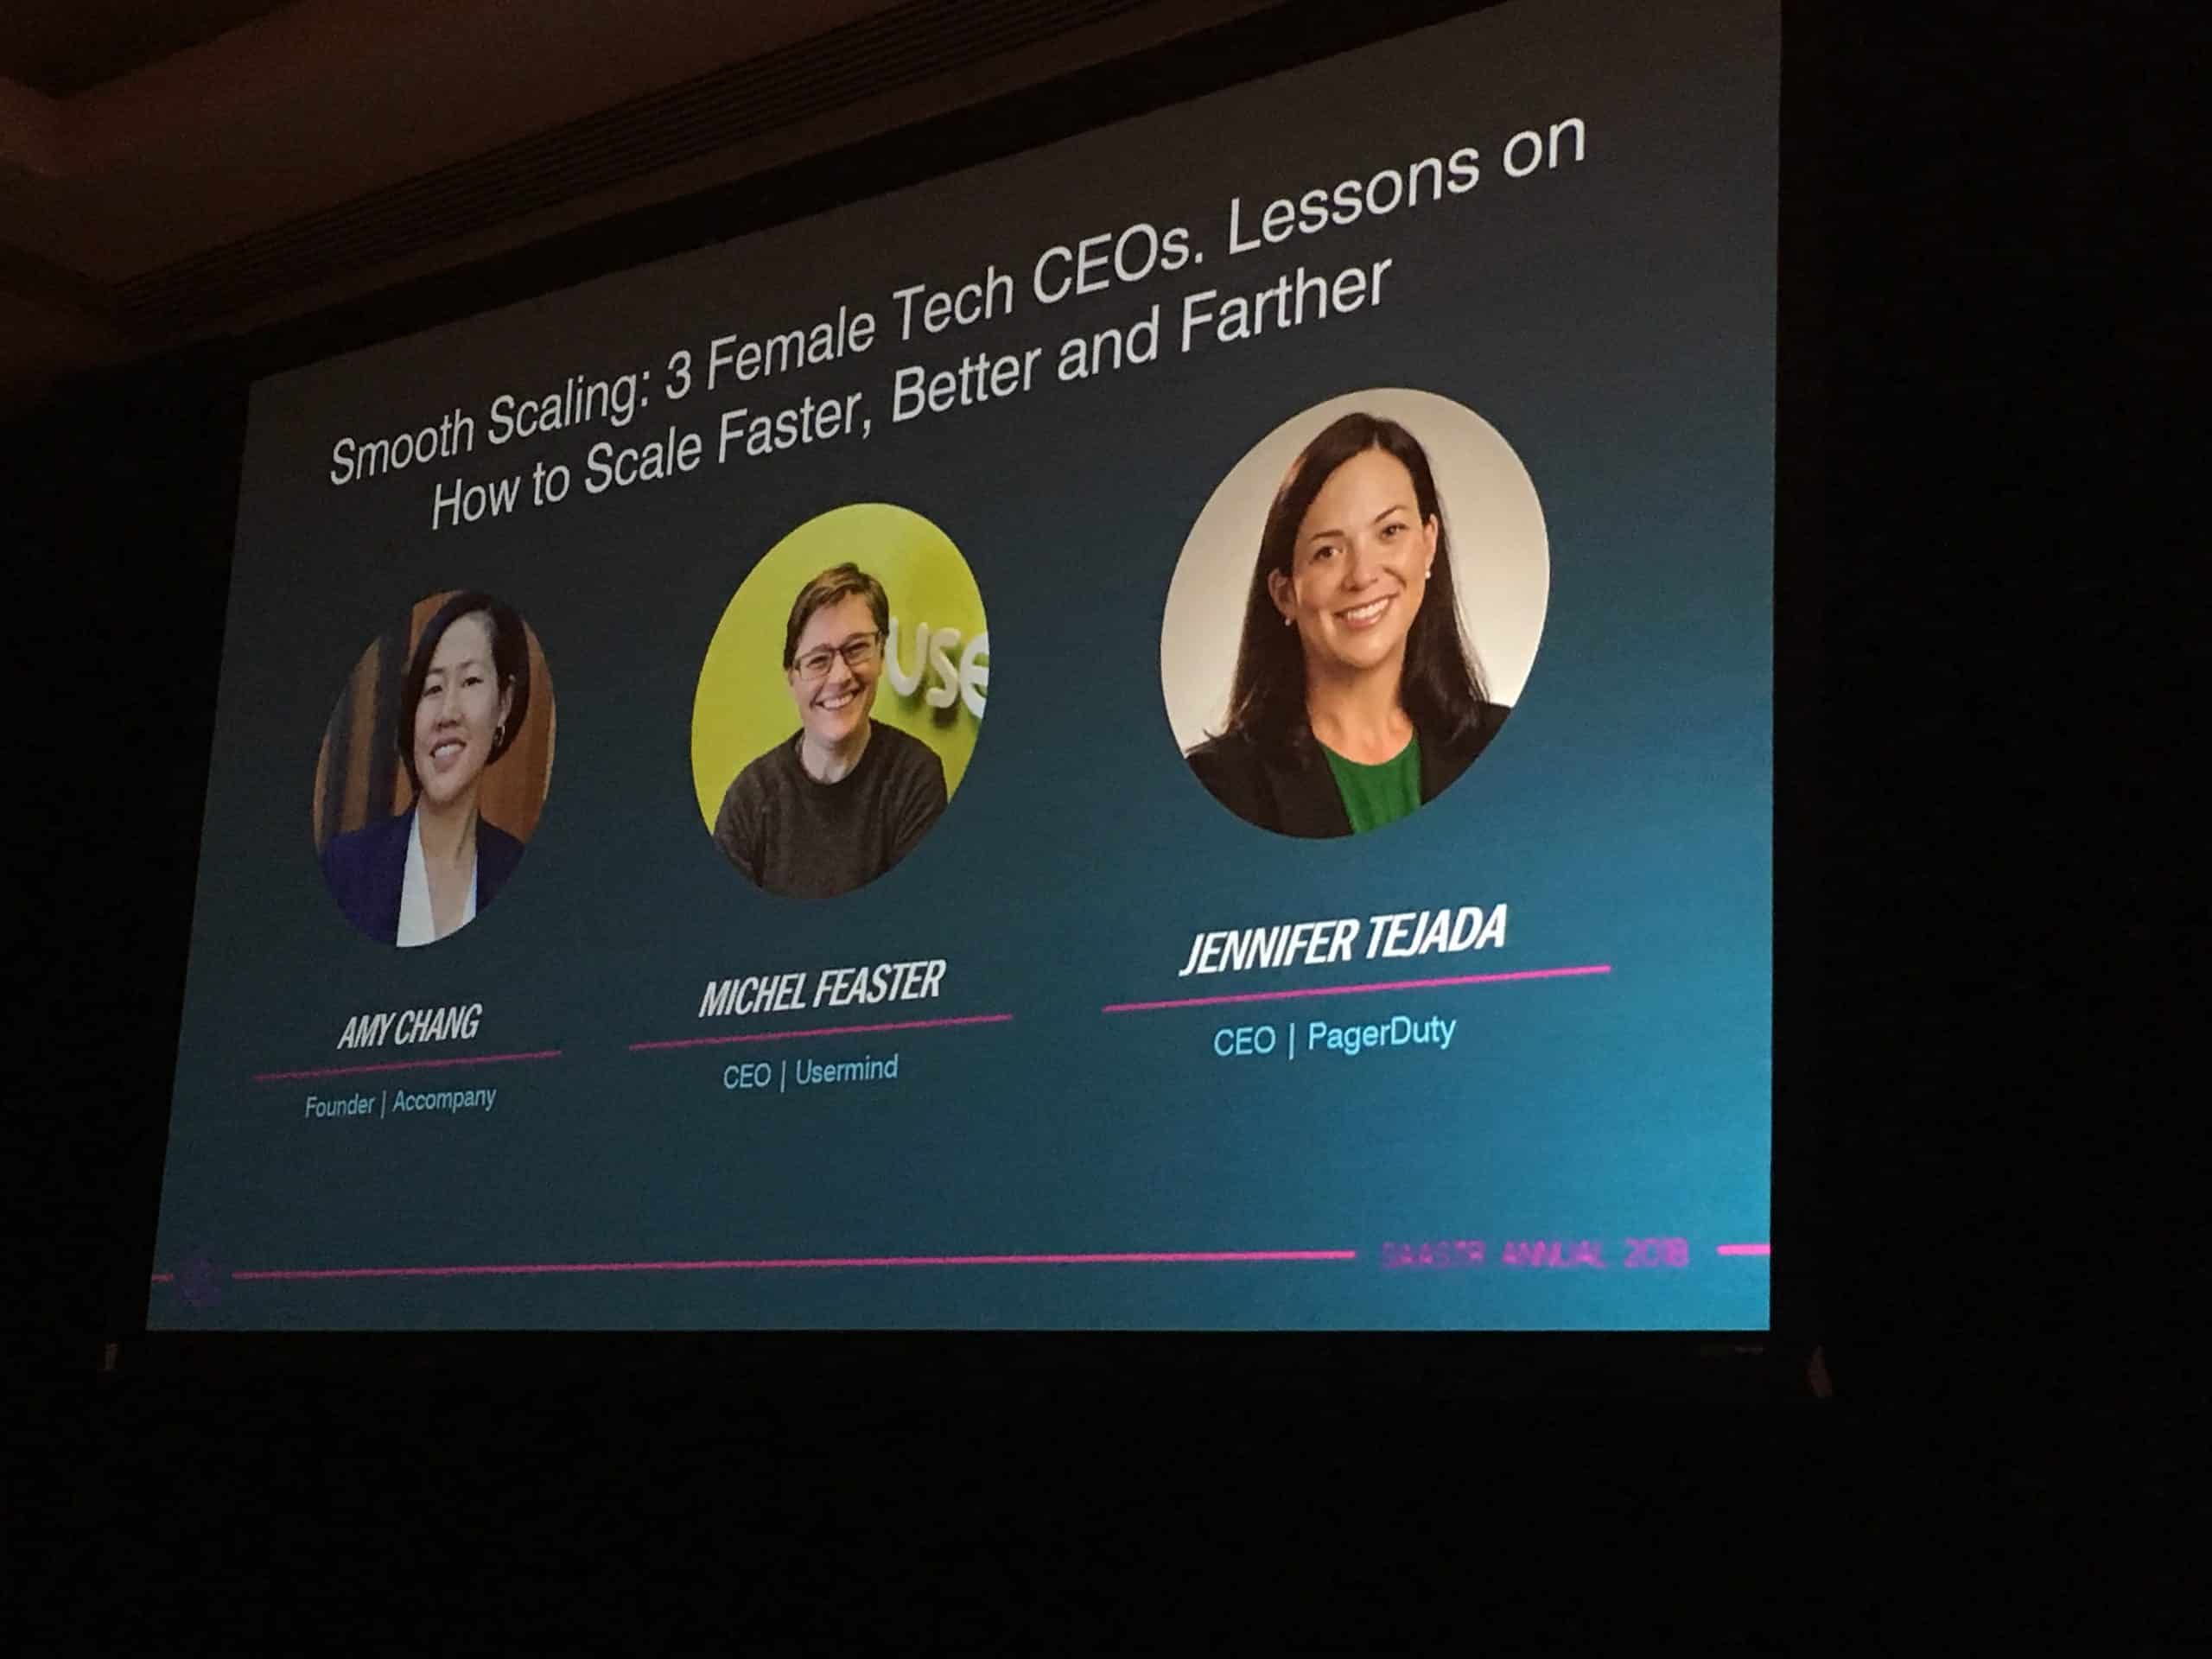 SaaStr 2018: Smooth Scaling: 3 Female Tech CEOs. Lessons on How to Scale Faster, Better and Farther - Paubox